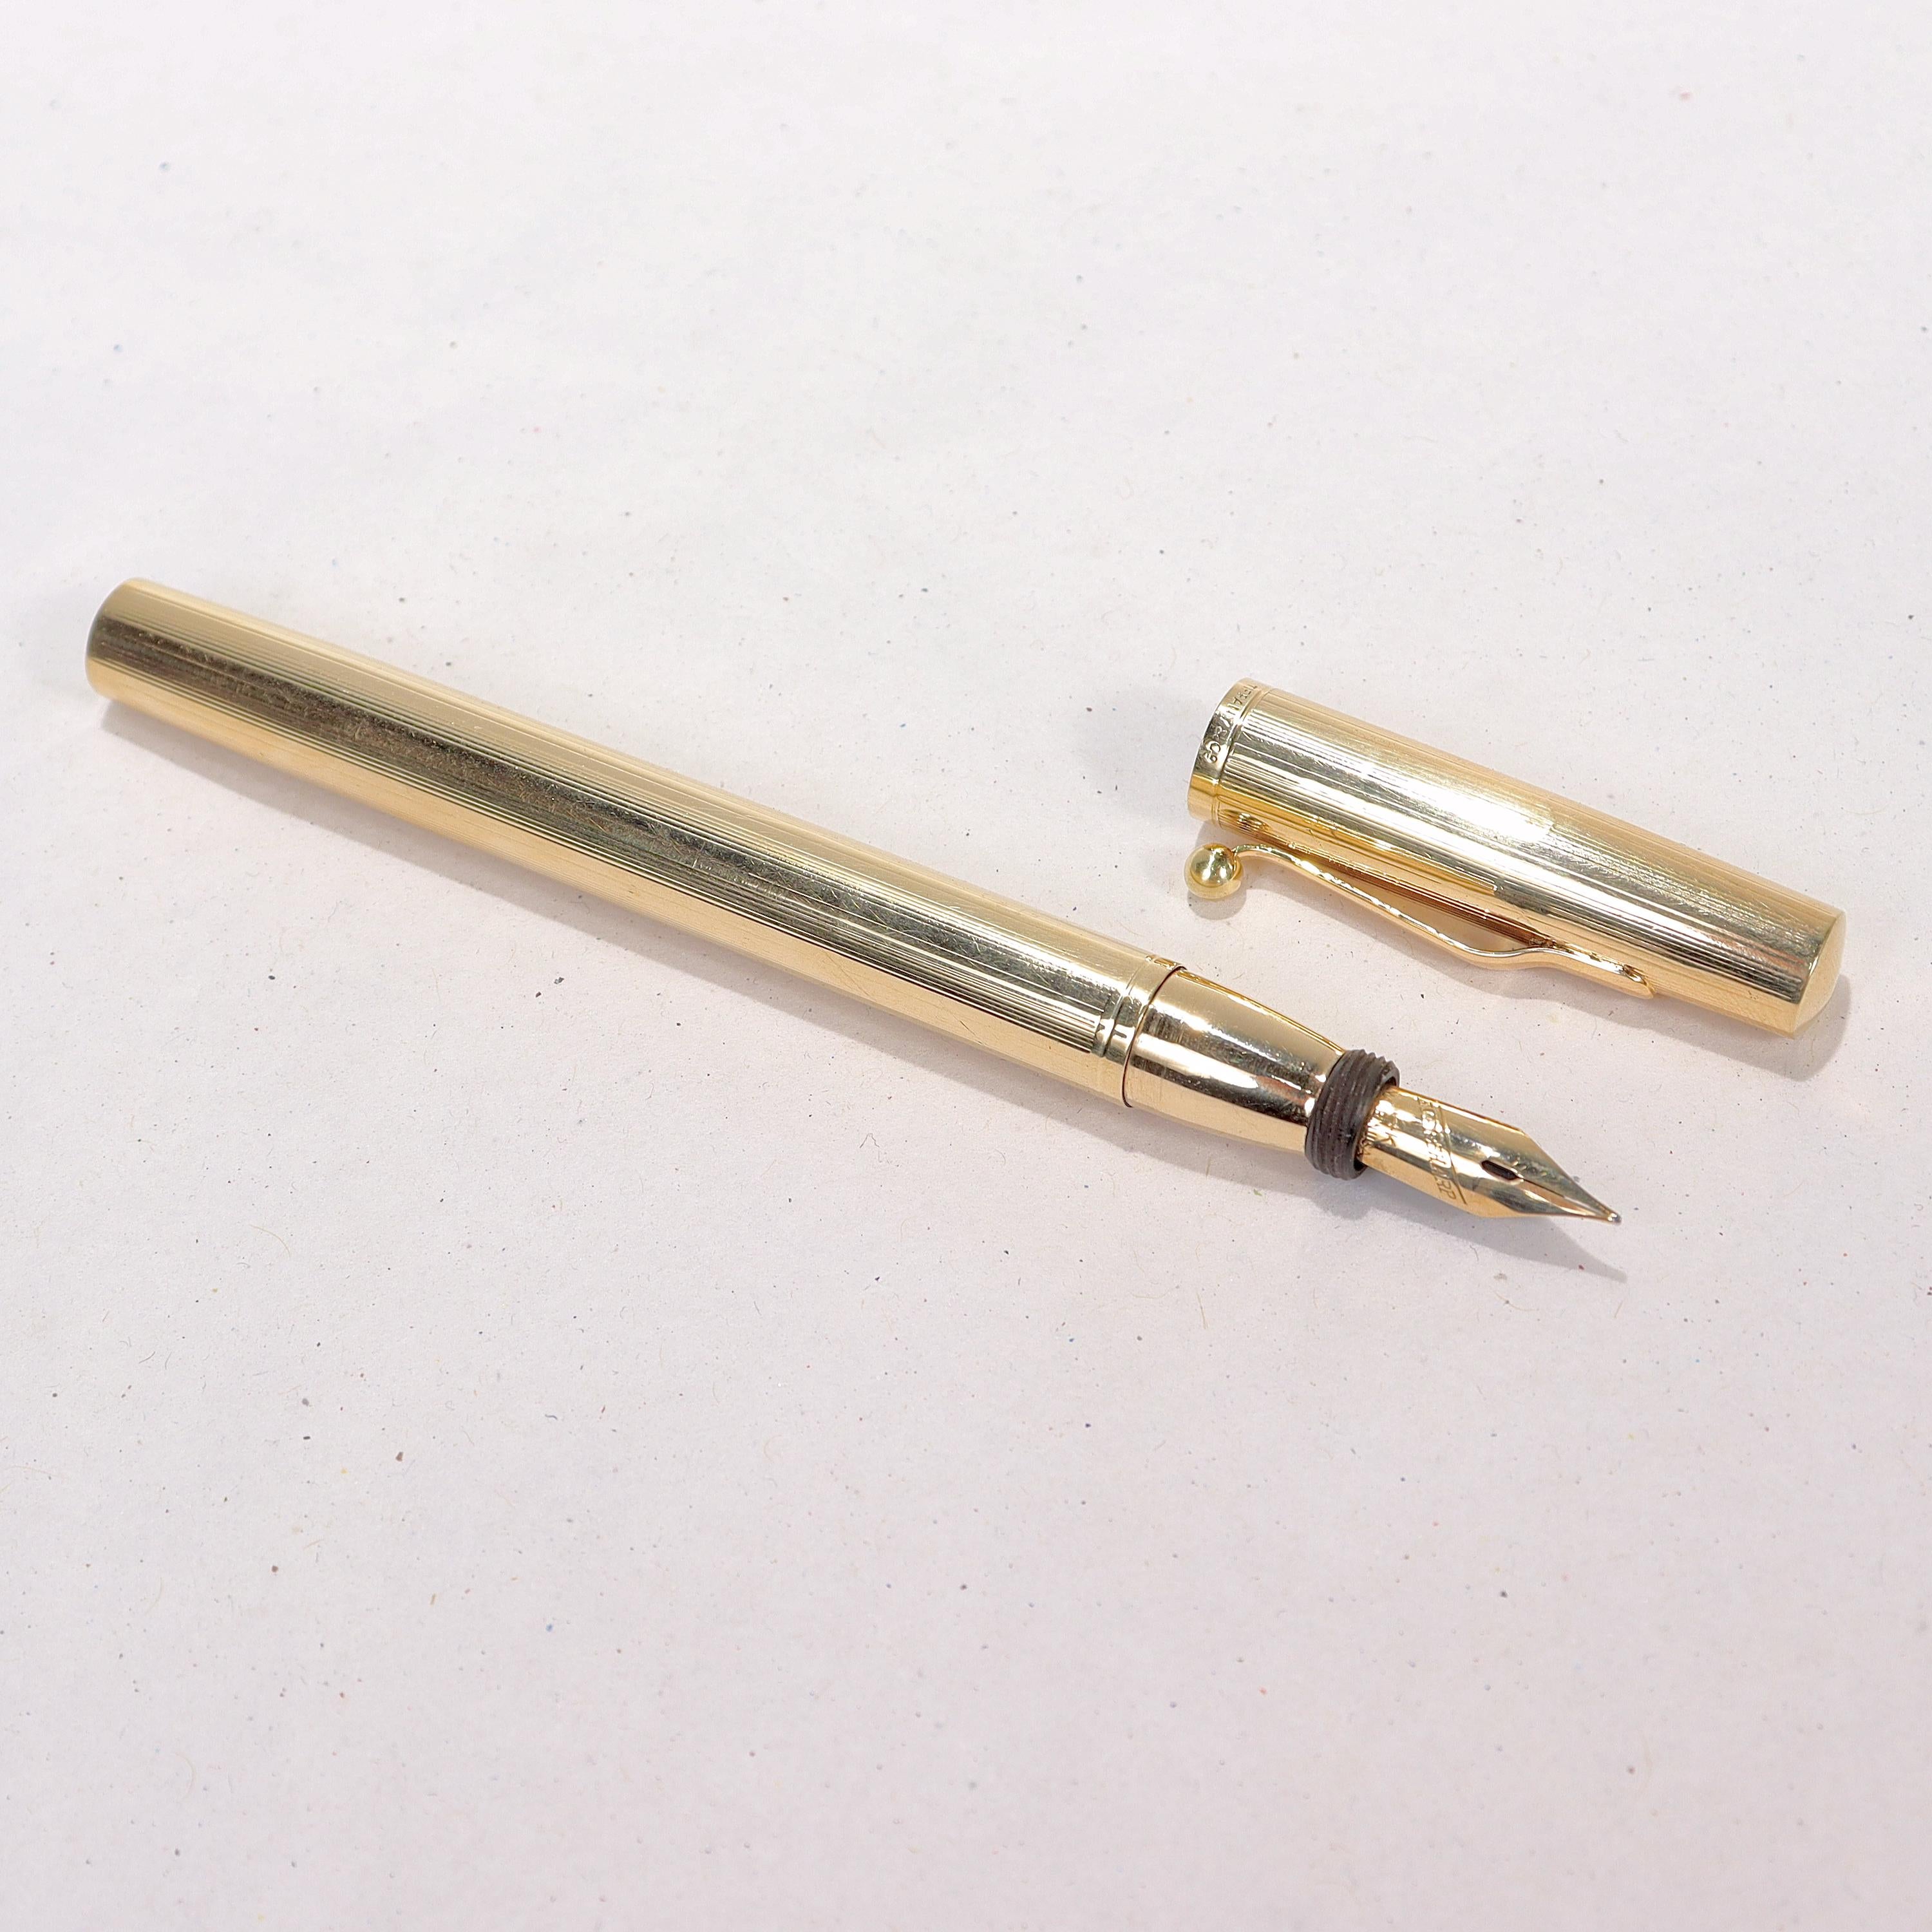 A fine 14K yellow gold fountain pen.

By Tiffany & Co.

With a 14 karat eversharp nip and a not currently functional chamber that needs a replaced rubber element.

Simply a wonderful antique Tiffany pen! 

Date:
Early 20th Century

Overall